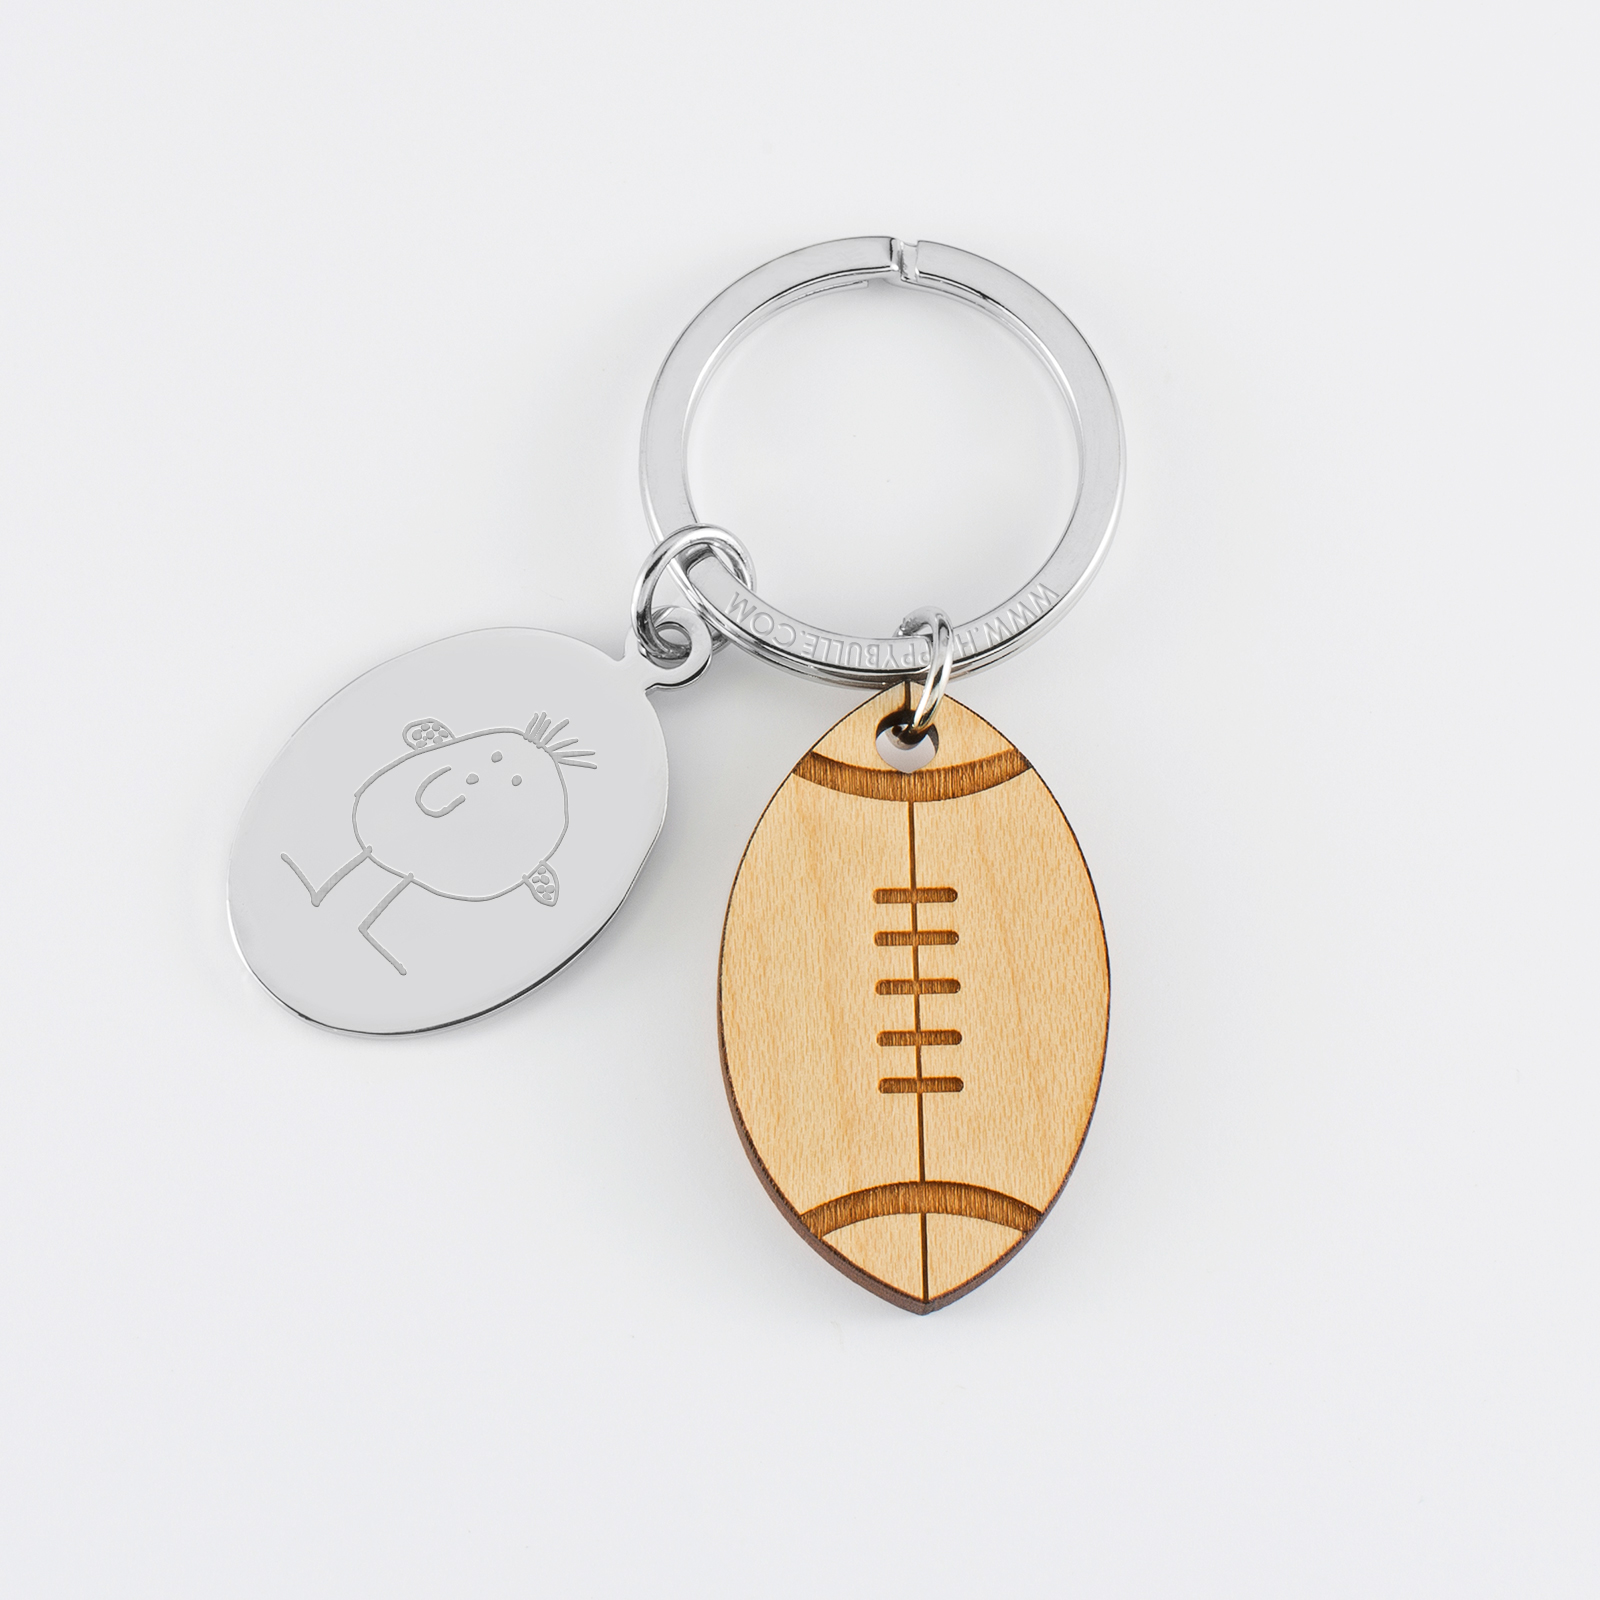 Personalised engraved oval steel medallion and wooden rugby charm keyring - sketch